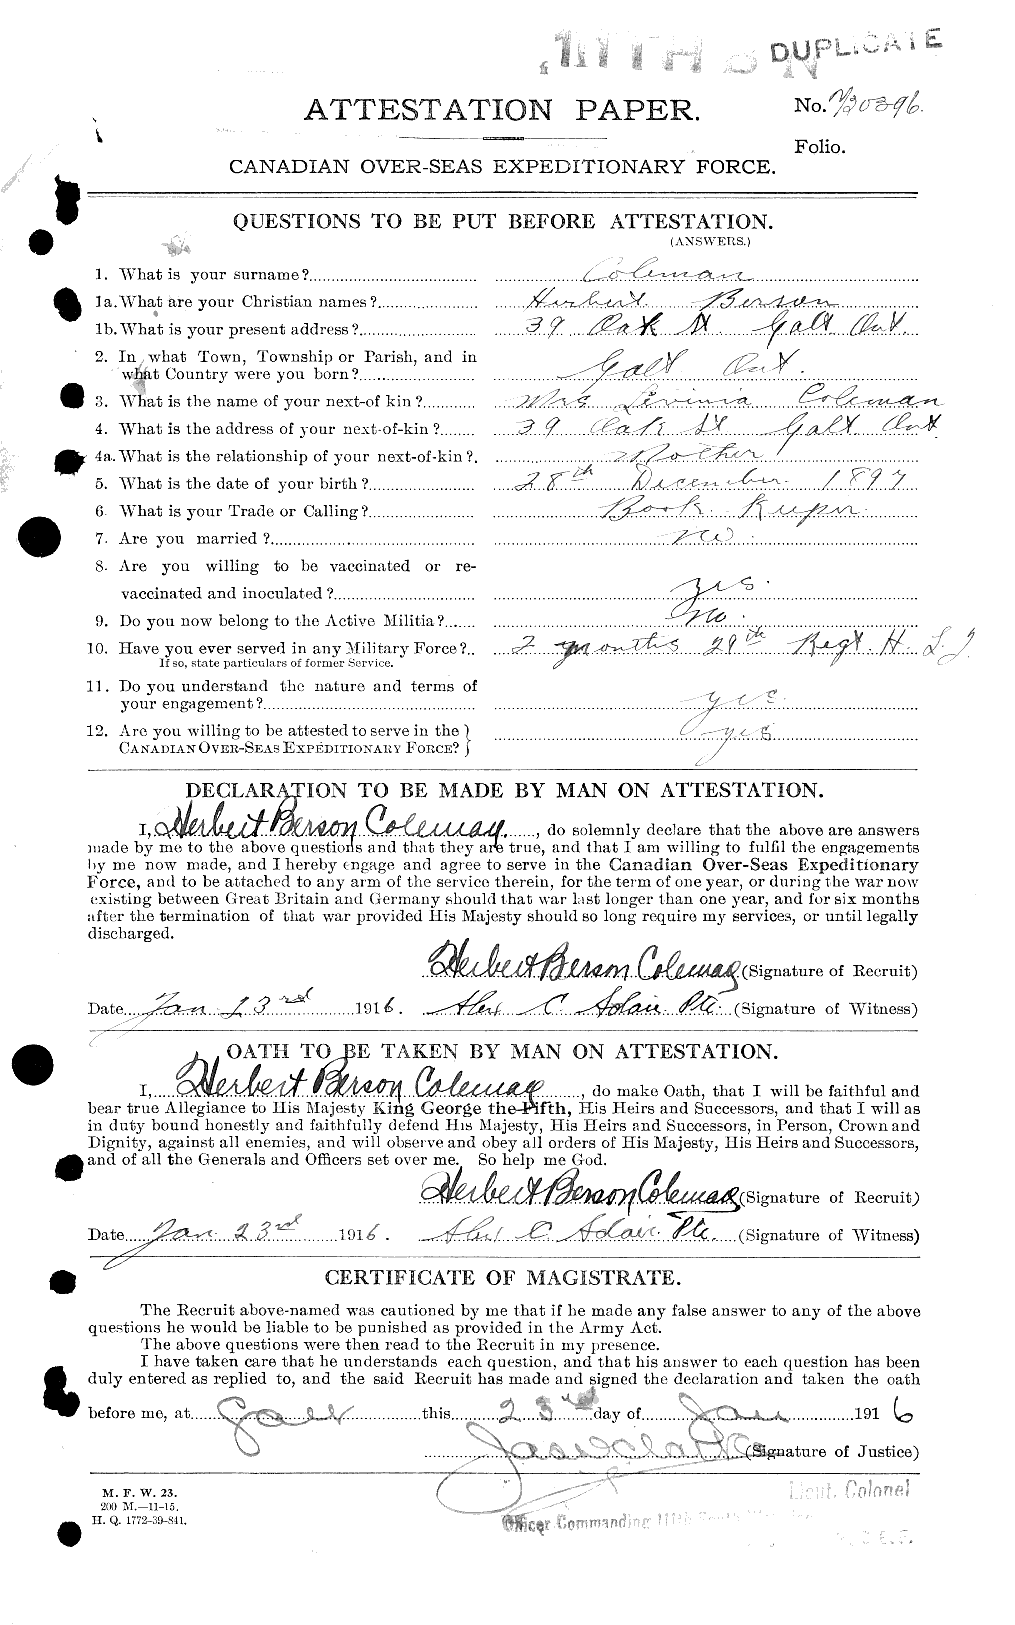 Personnel Records of the First World War - CEF 028173a